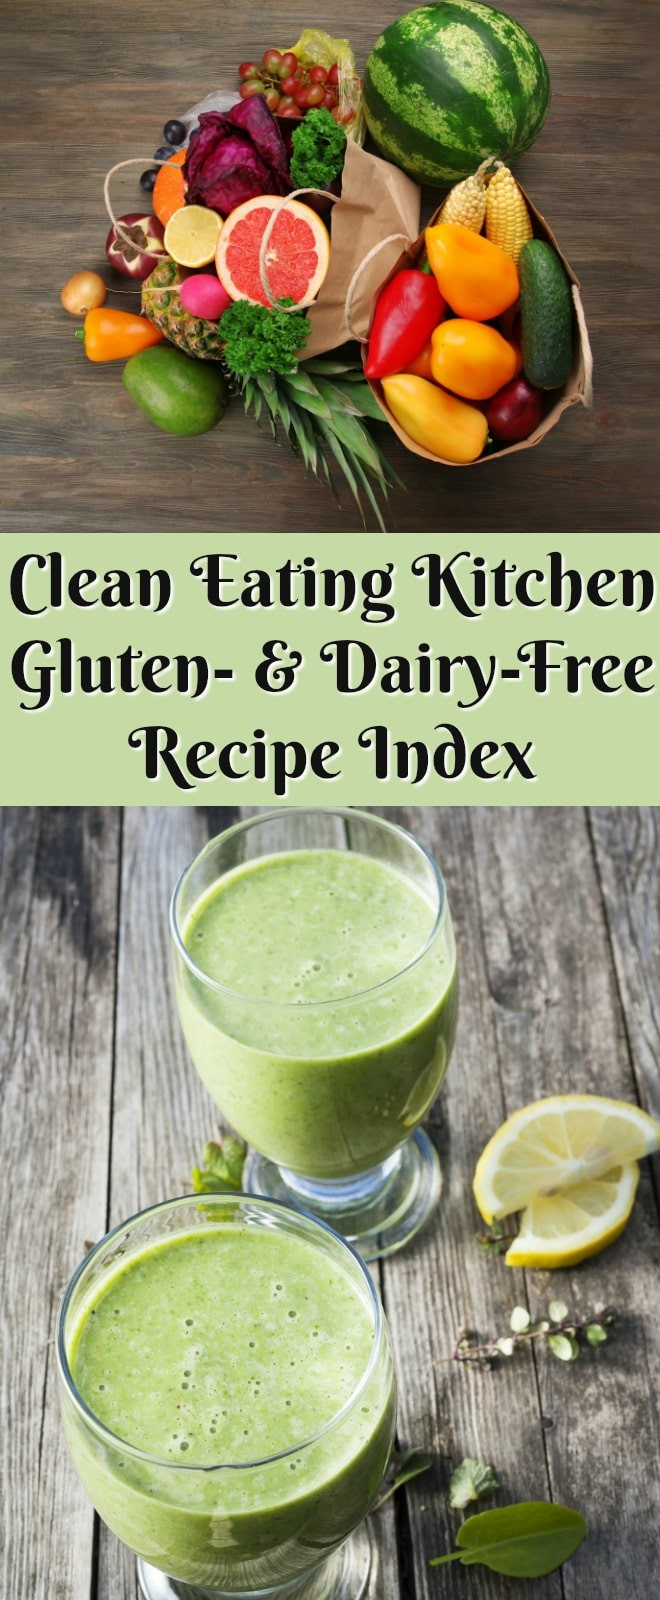 Clean Eating Blogs With Recipes
 Recipes Clean Eating Kitchen